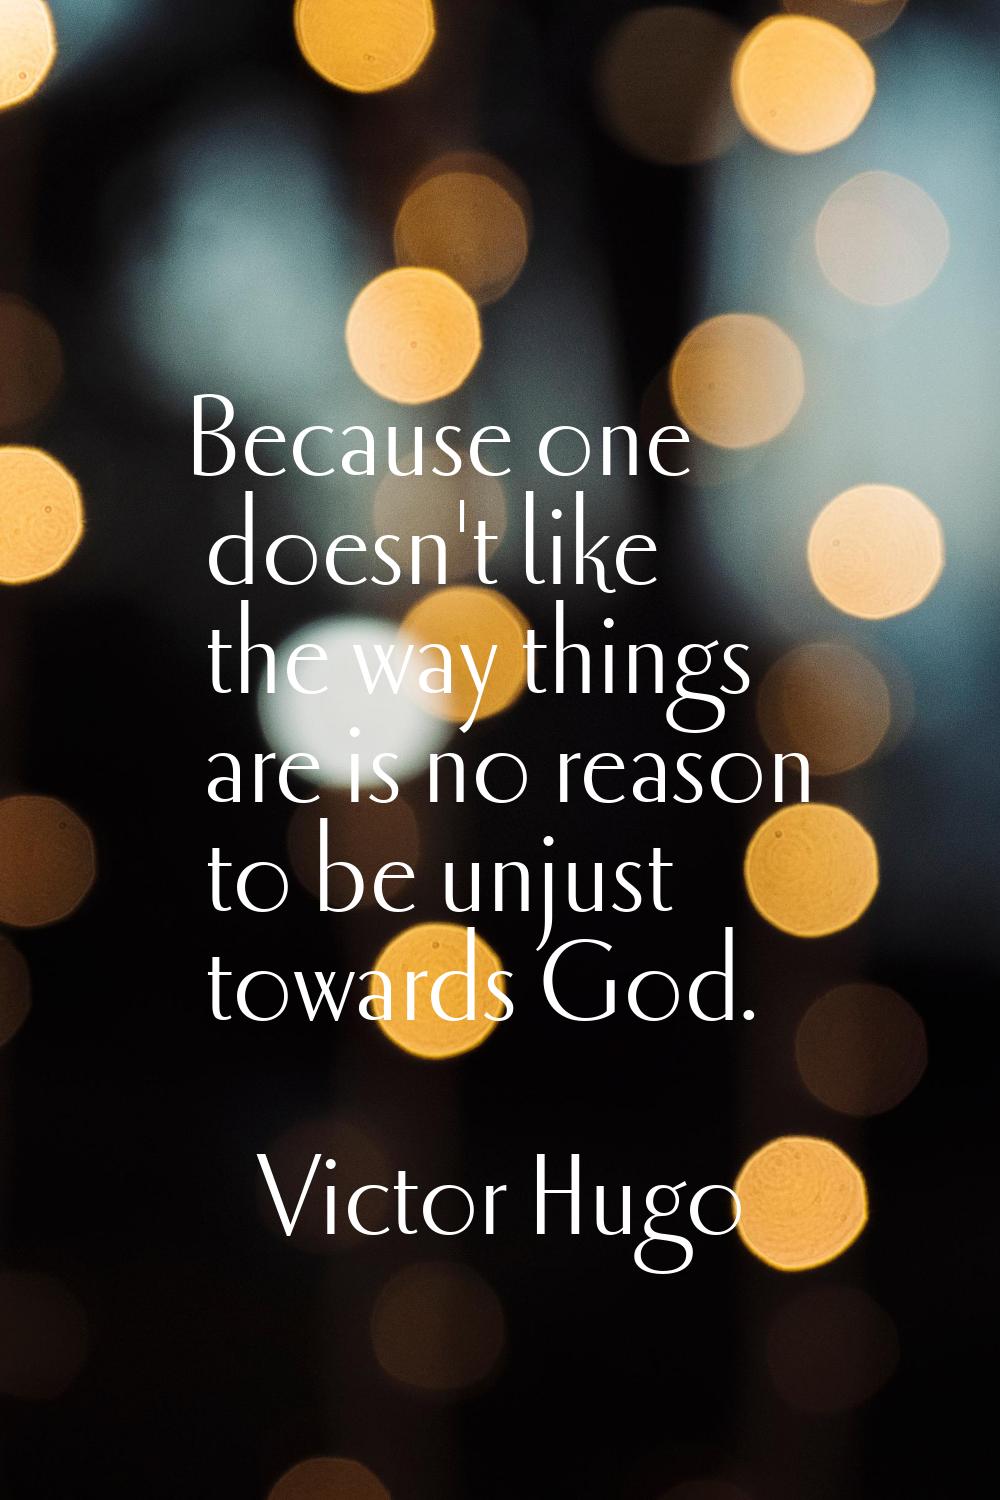 Because one doesn't like the way things are is no reason to be unjust towards God.